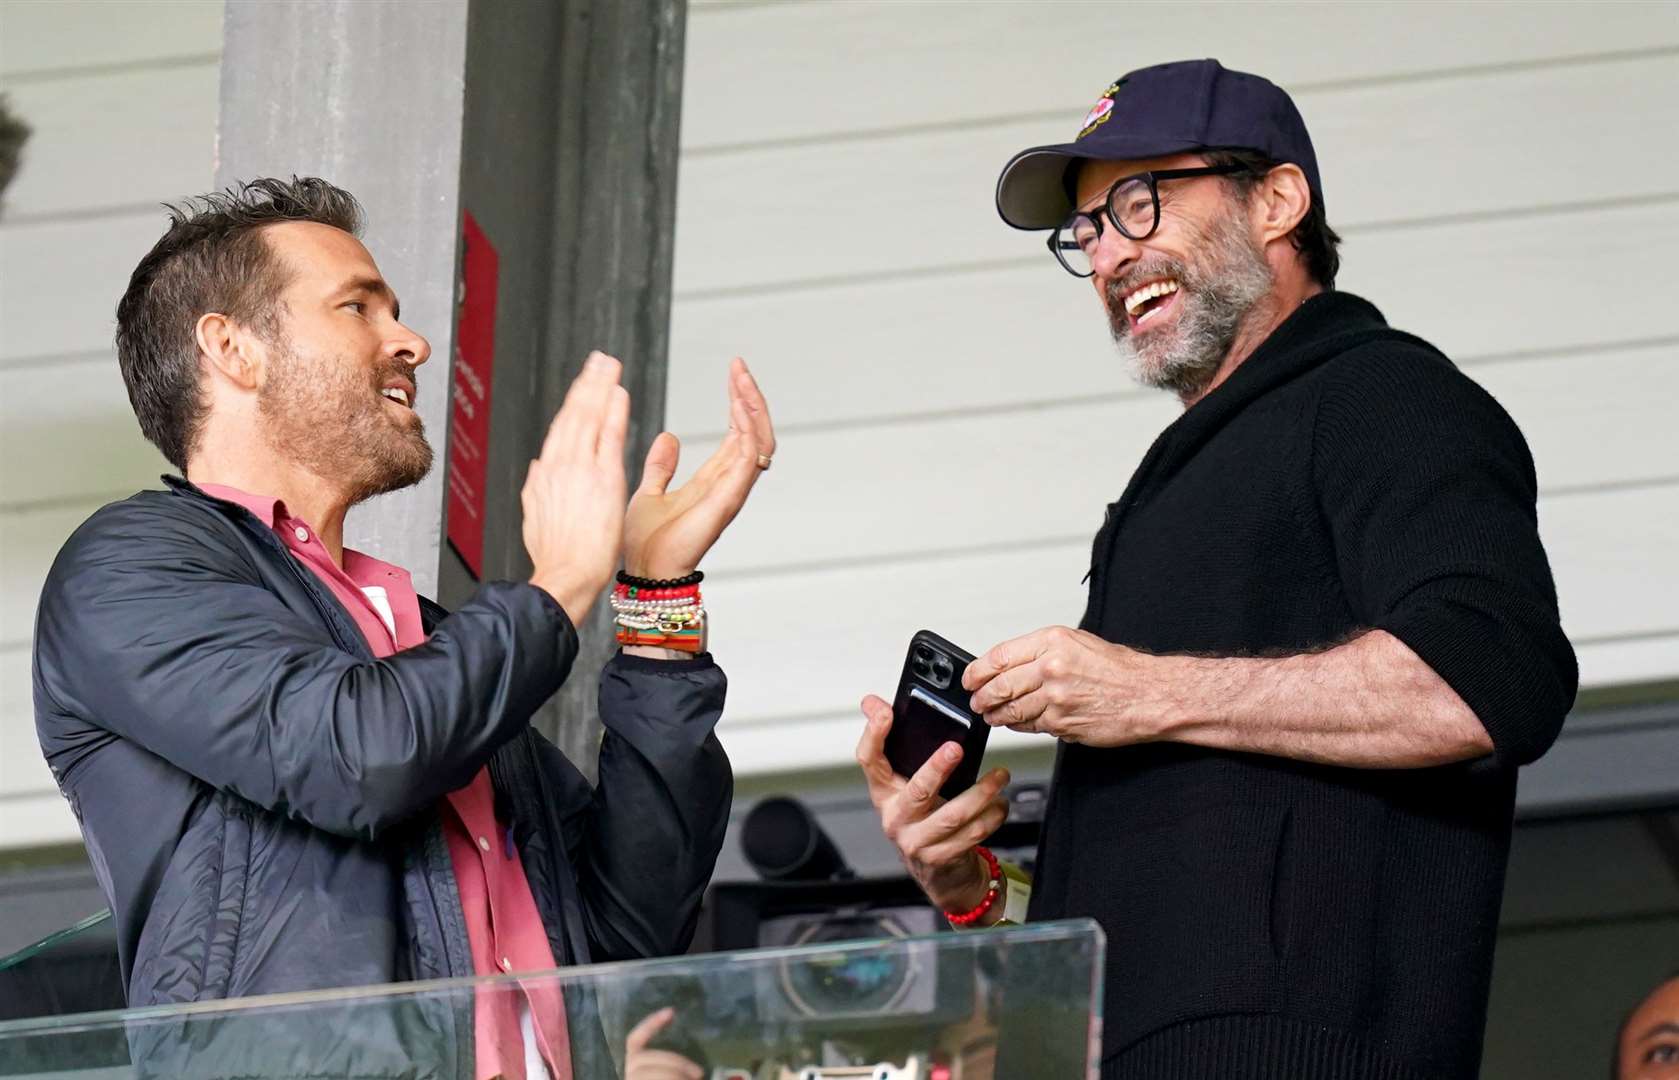 Wrexham co-owner Ryan Reynolds and Hugh Jackman in the stands before a League Two match (Jacob King/PA)